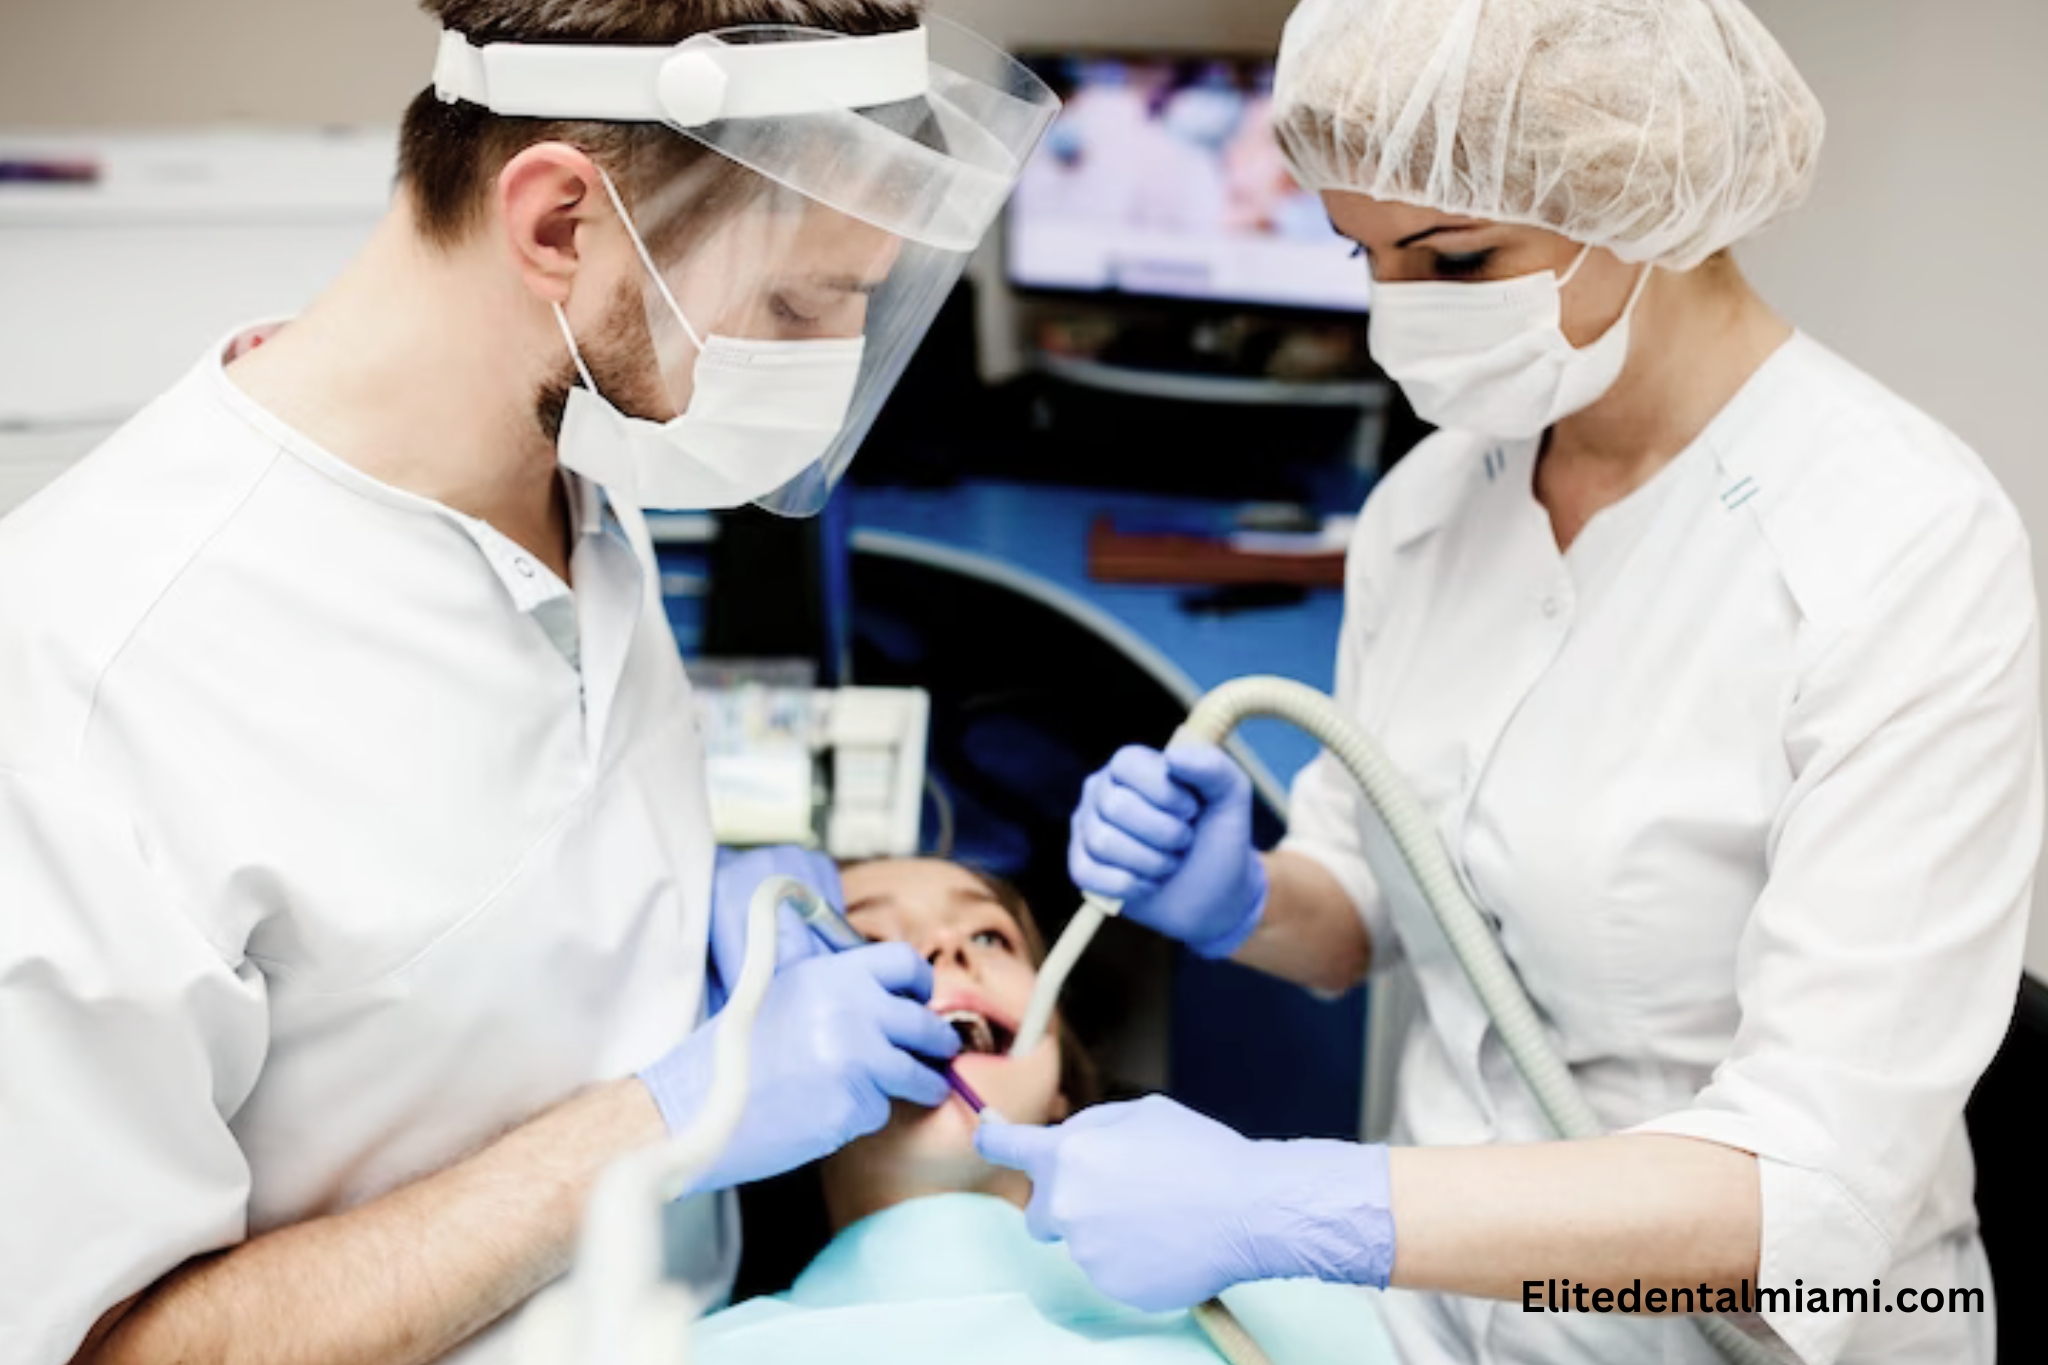 Is Oral Surgery Medical Or Dental